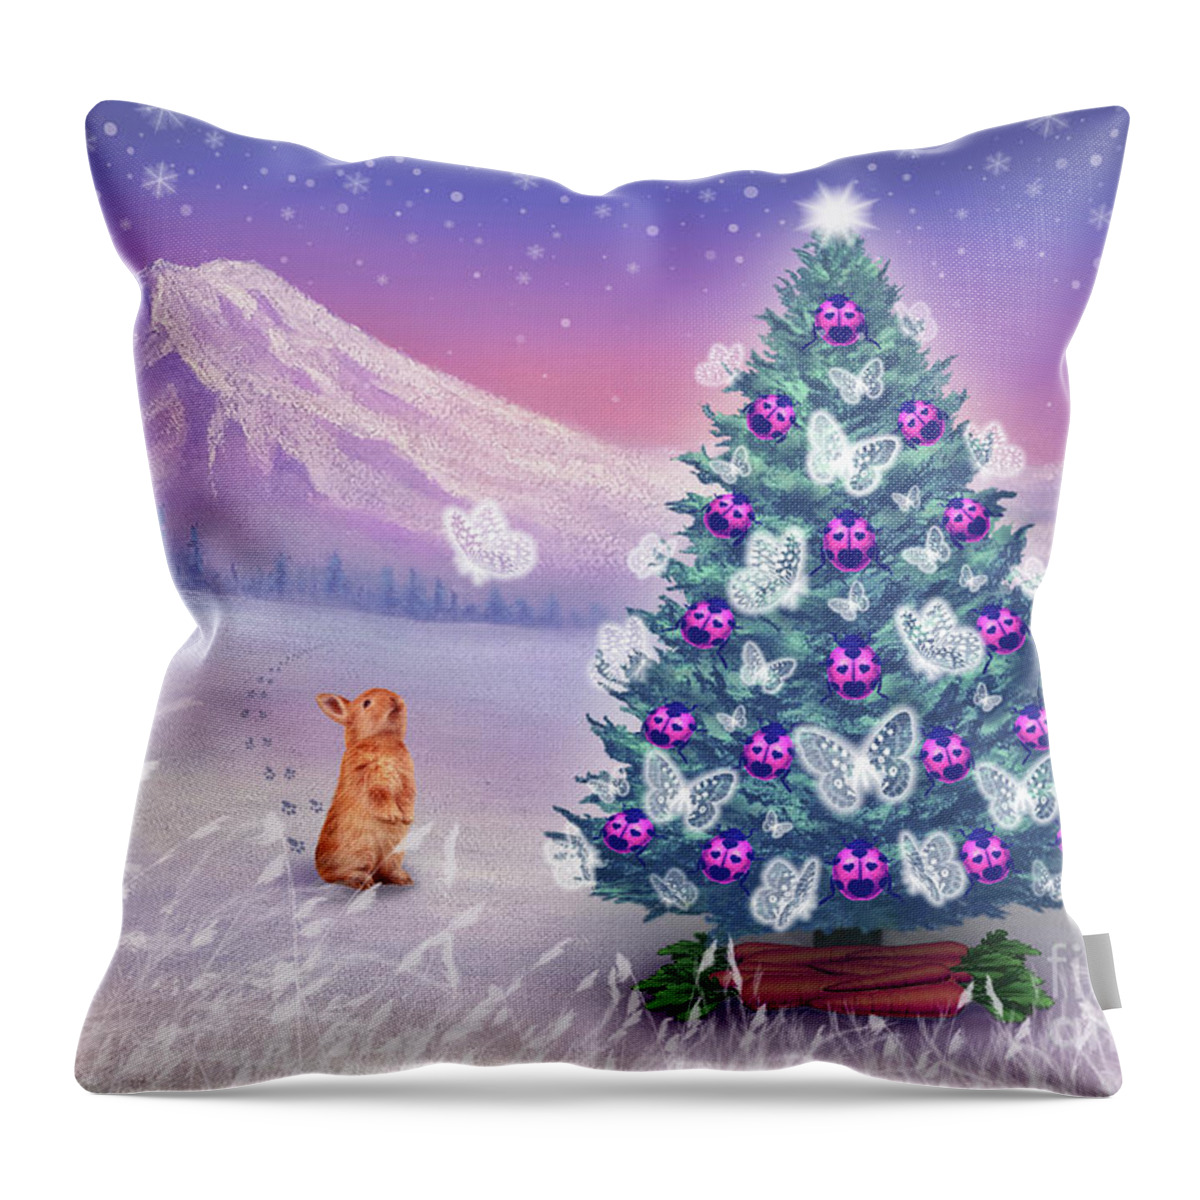 Holiday Throw Pillow featuring the painting Dream Christmas Tree by Yoonhee Ko